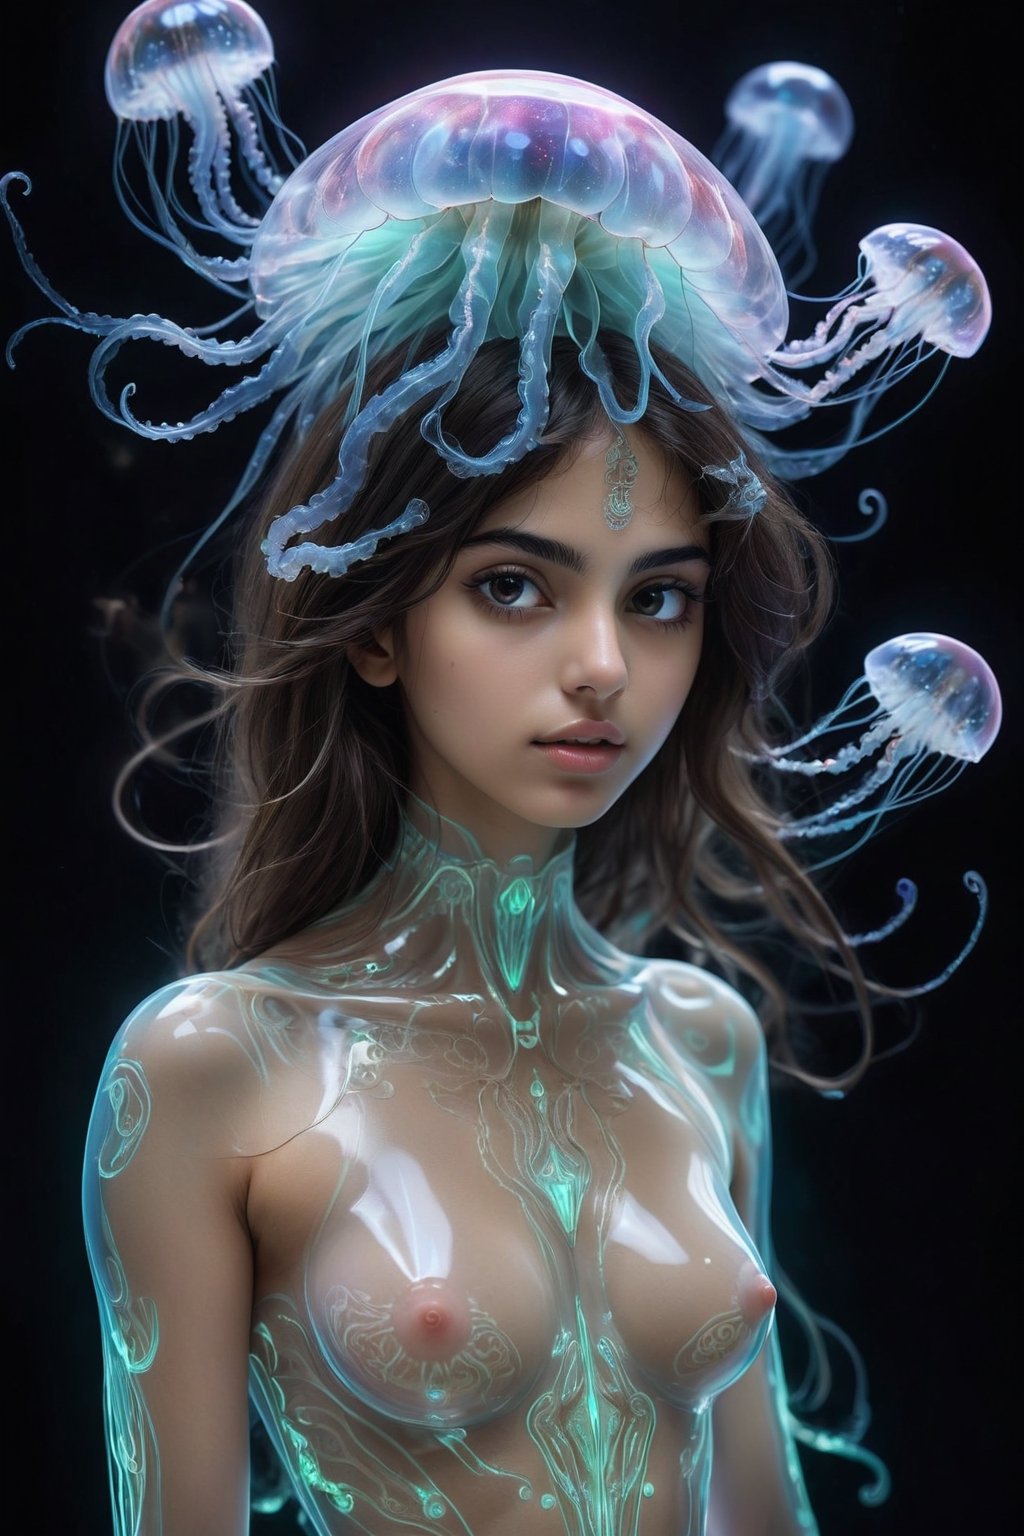 A young Persian  girl with translucent skin, resembling a celestial being, draws inspiration from jellyfish,luminescent organ,beautiful body
,showcasing a beautiful extraterrestrial presence. The ethereal combination of translucent skin and celestial motifs transforms her into a captivating otherworldly entity.,Clear Glass Skin,real_booster,neon photography style